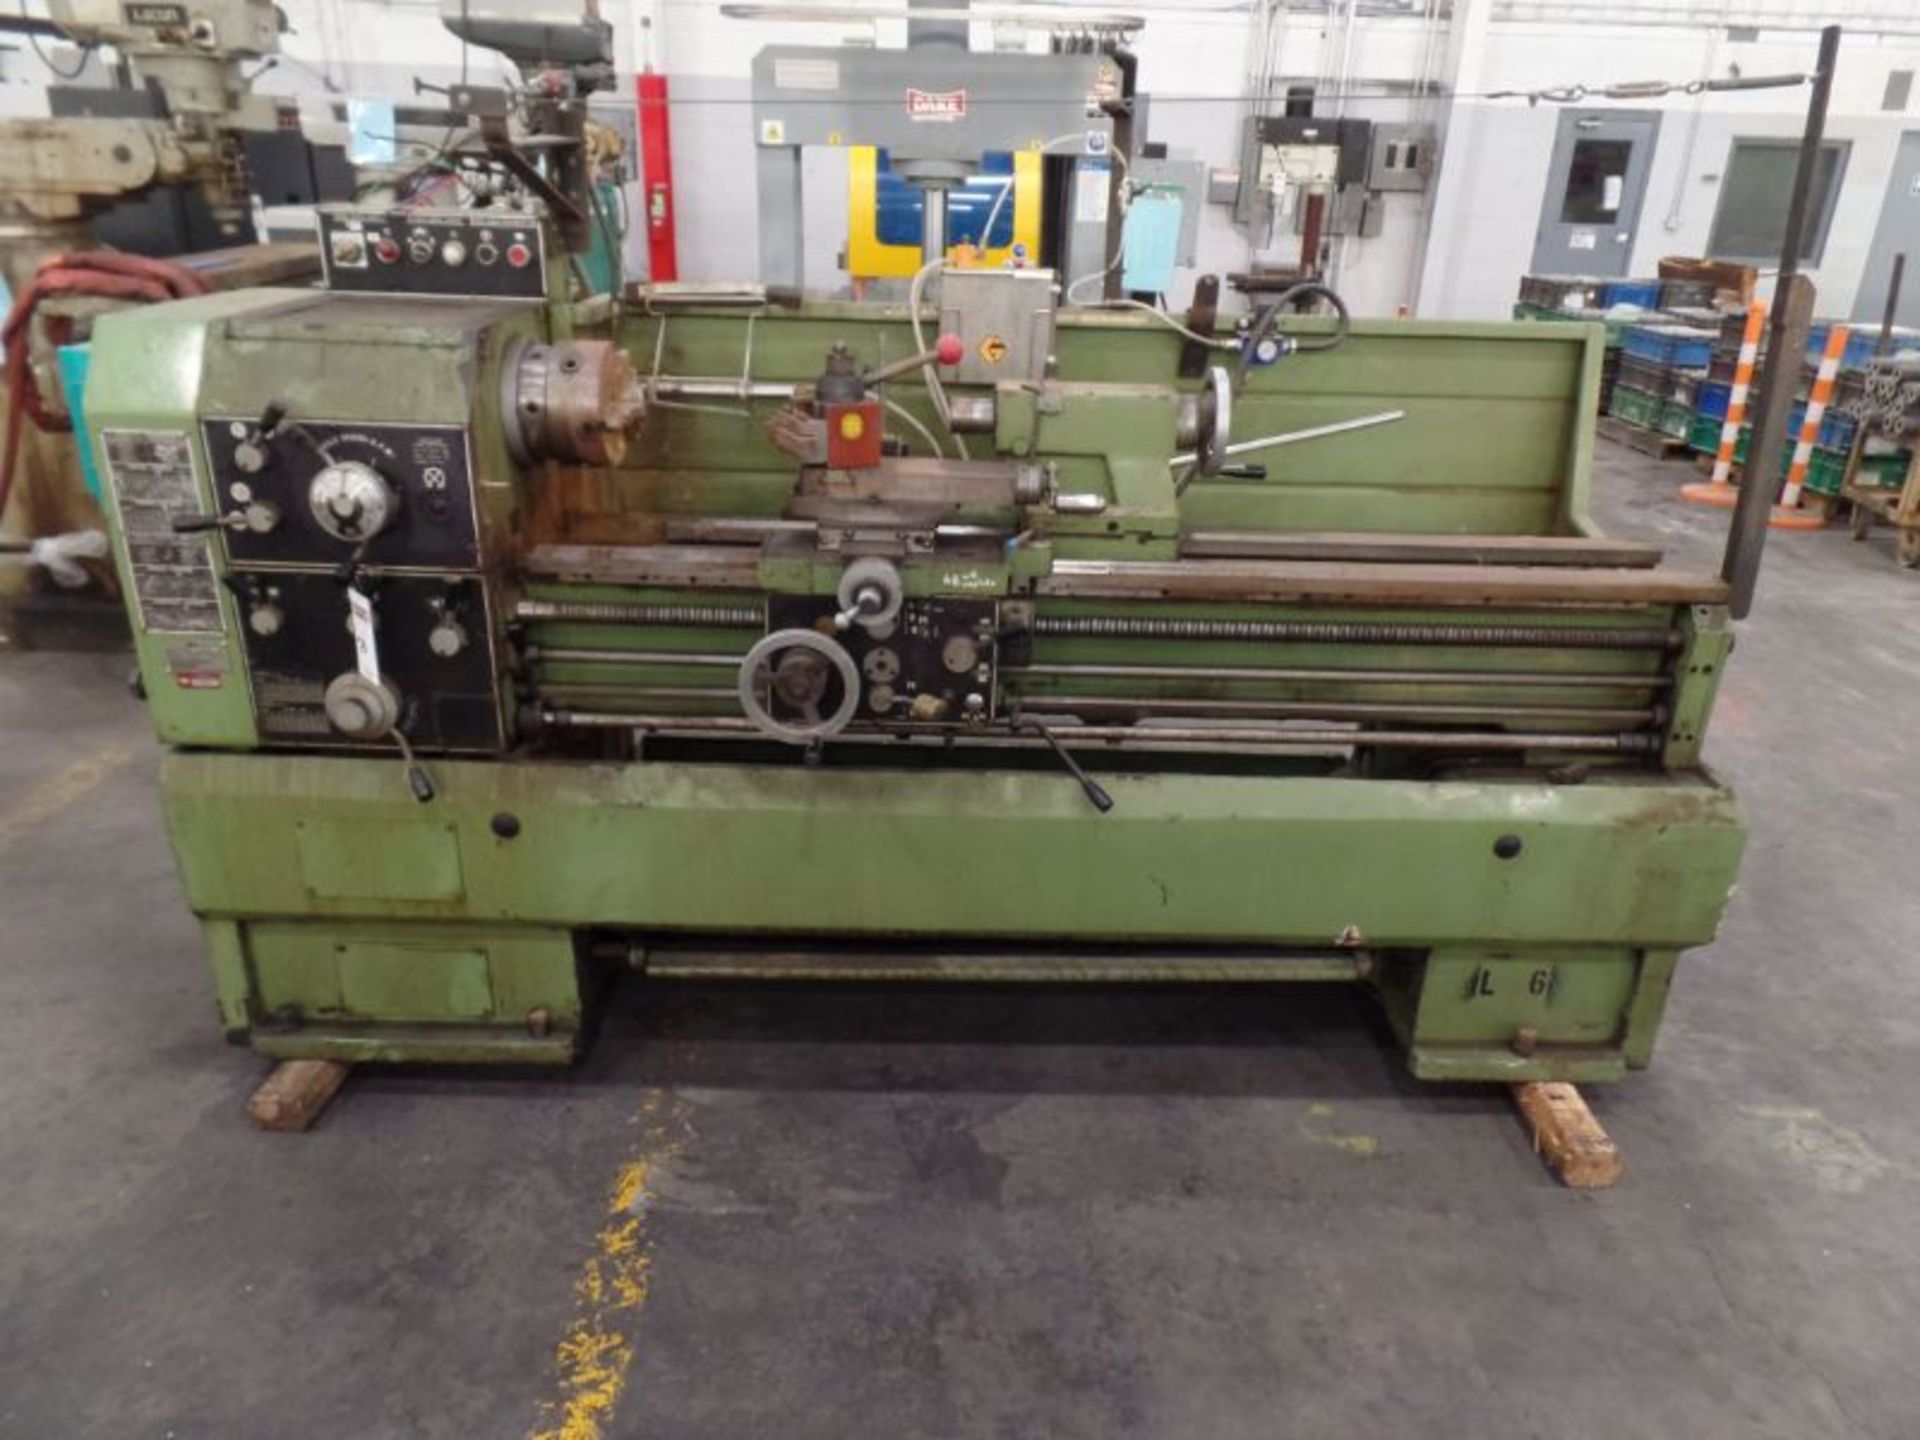 Enco 1111760 Manual Lathe, 8" Chuck, 56" Between Centers, s/n 104 - Image 2 of 10